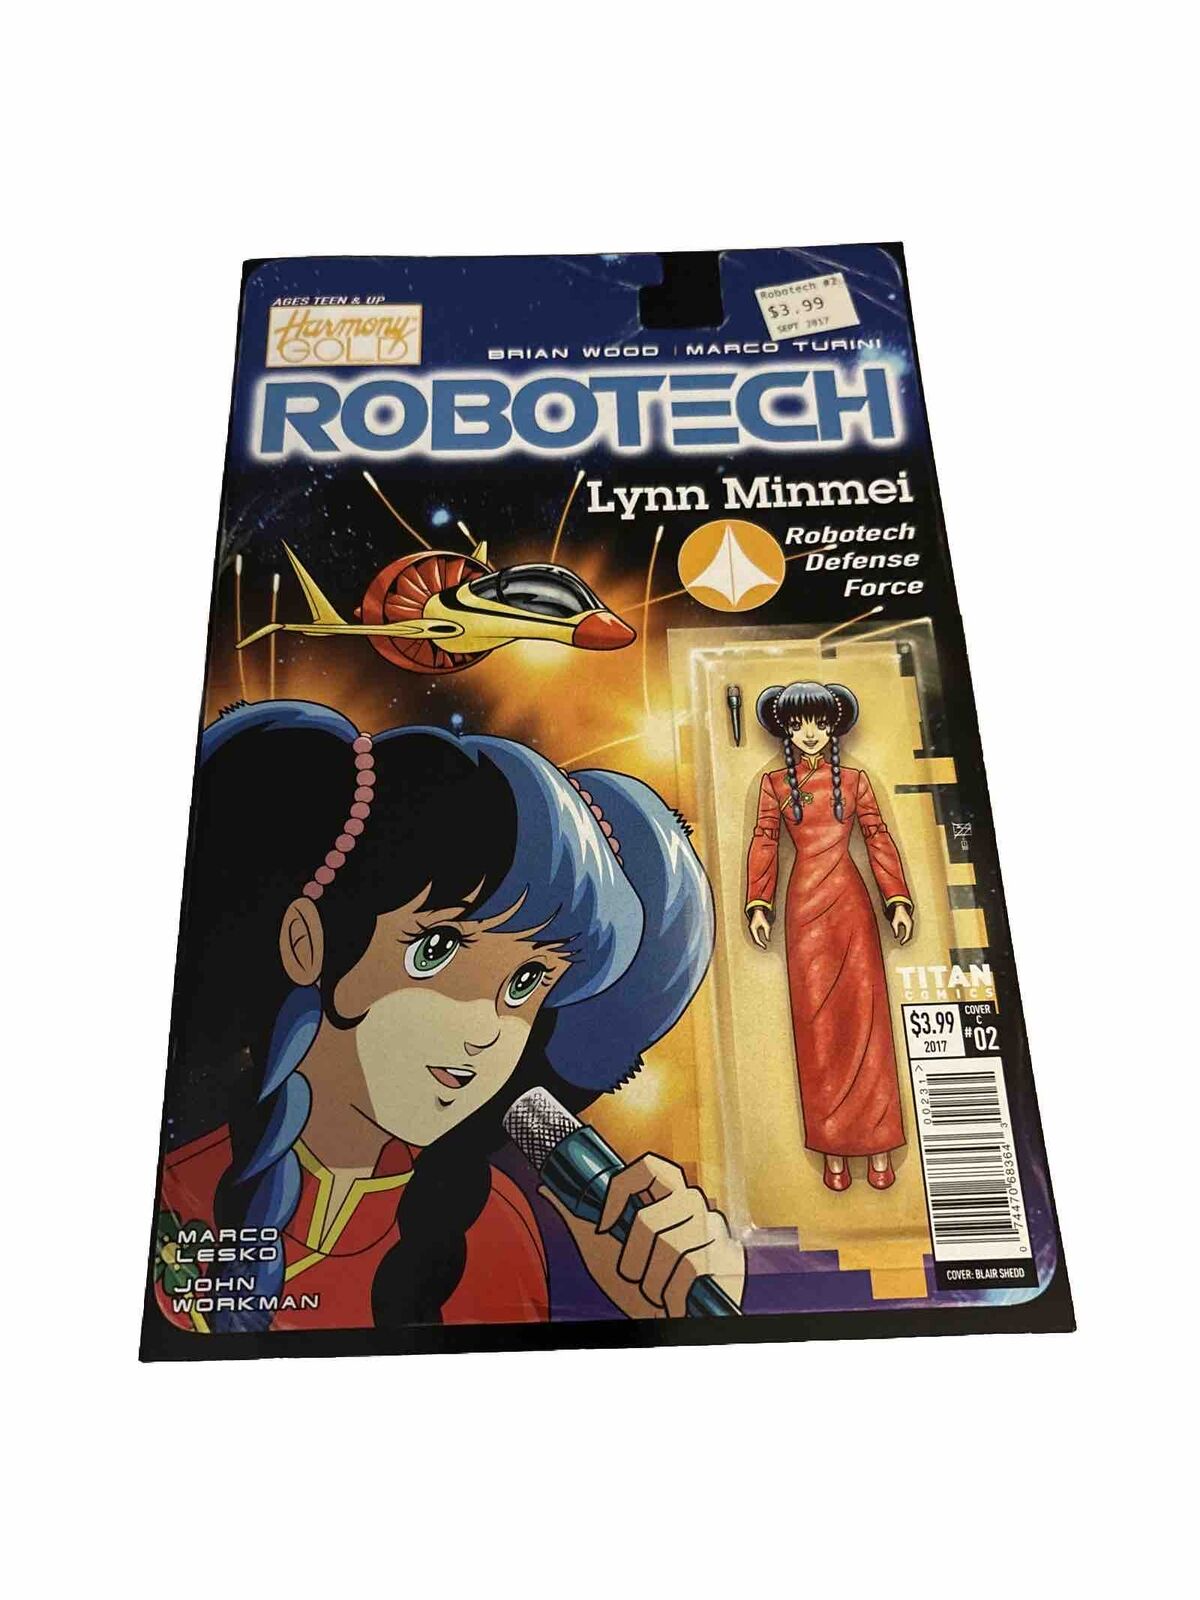 ROBOTECH (2017) #2 Action Figure VARIANT Cover - NM (box50)